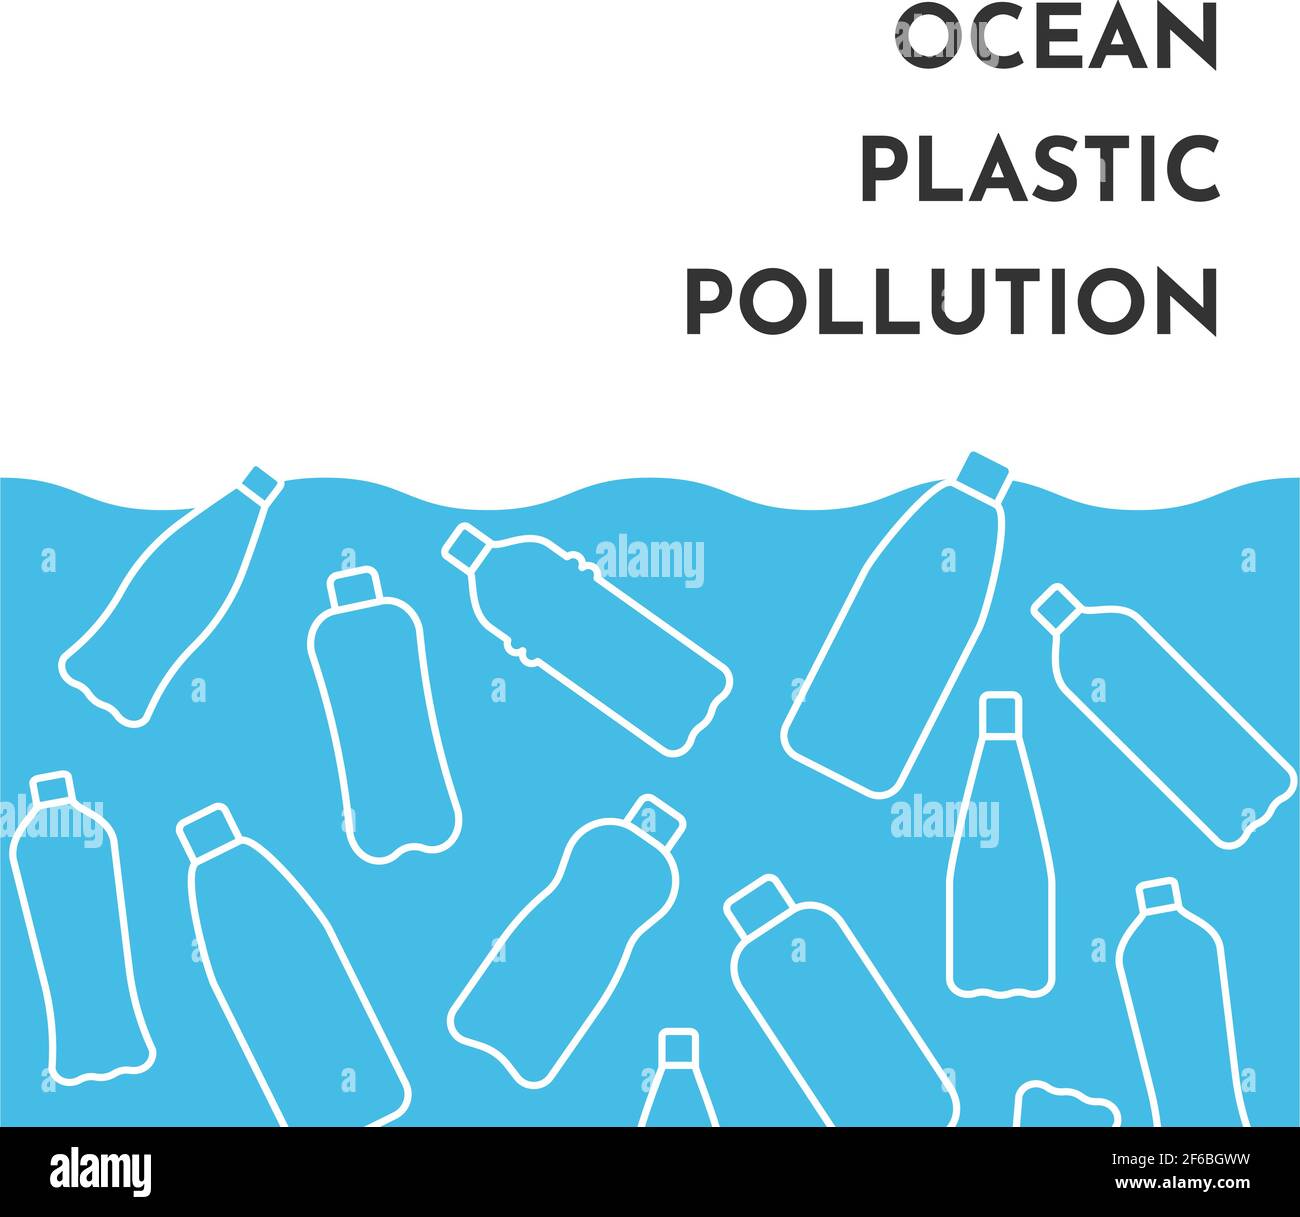 Vector illustration with isolated white outline icons of plastic bottles in the World ocean. Plastic pollution. Blue background. Stock Vector